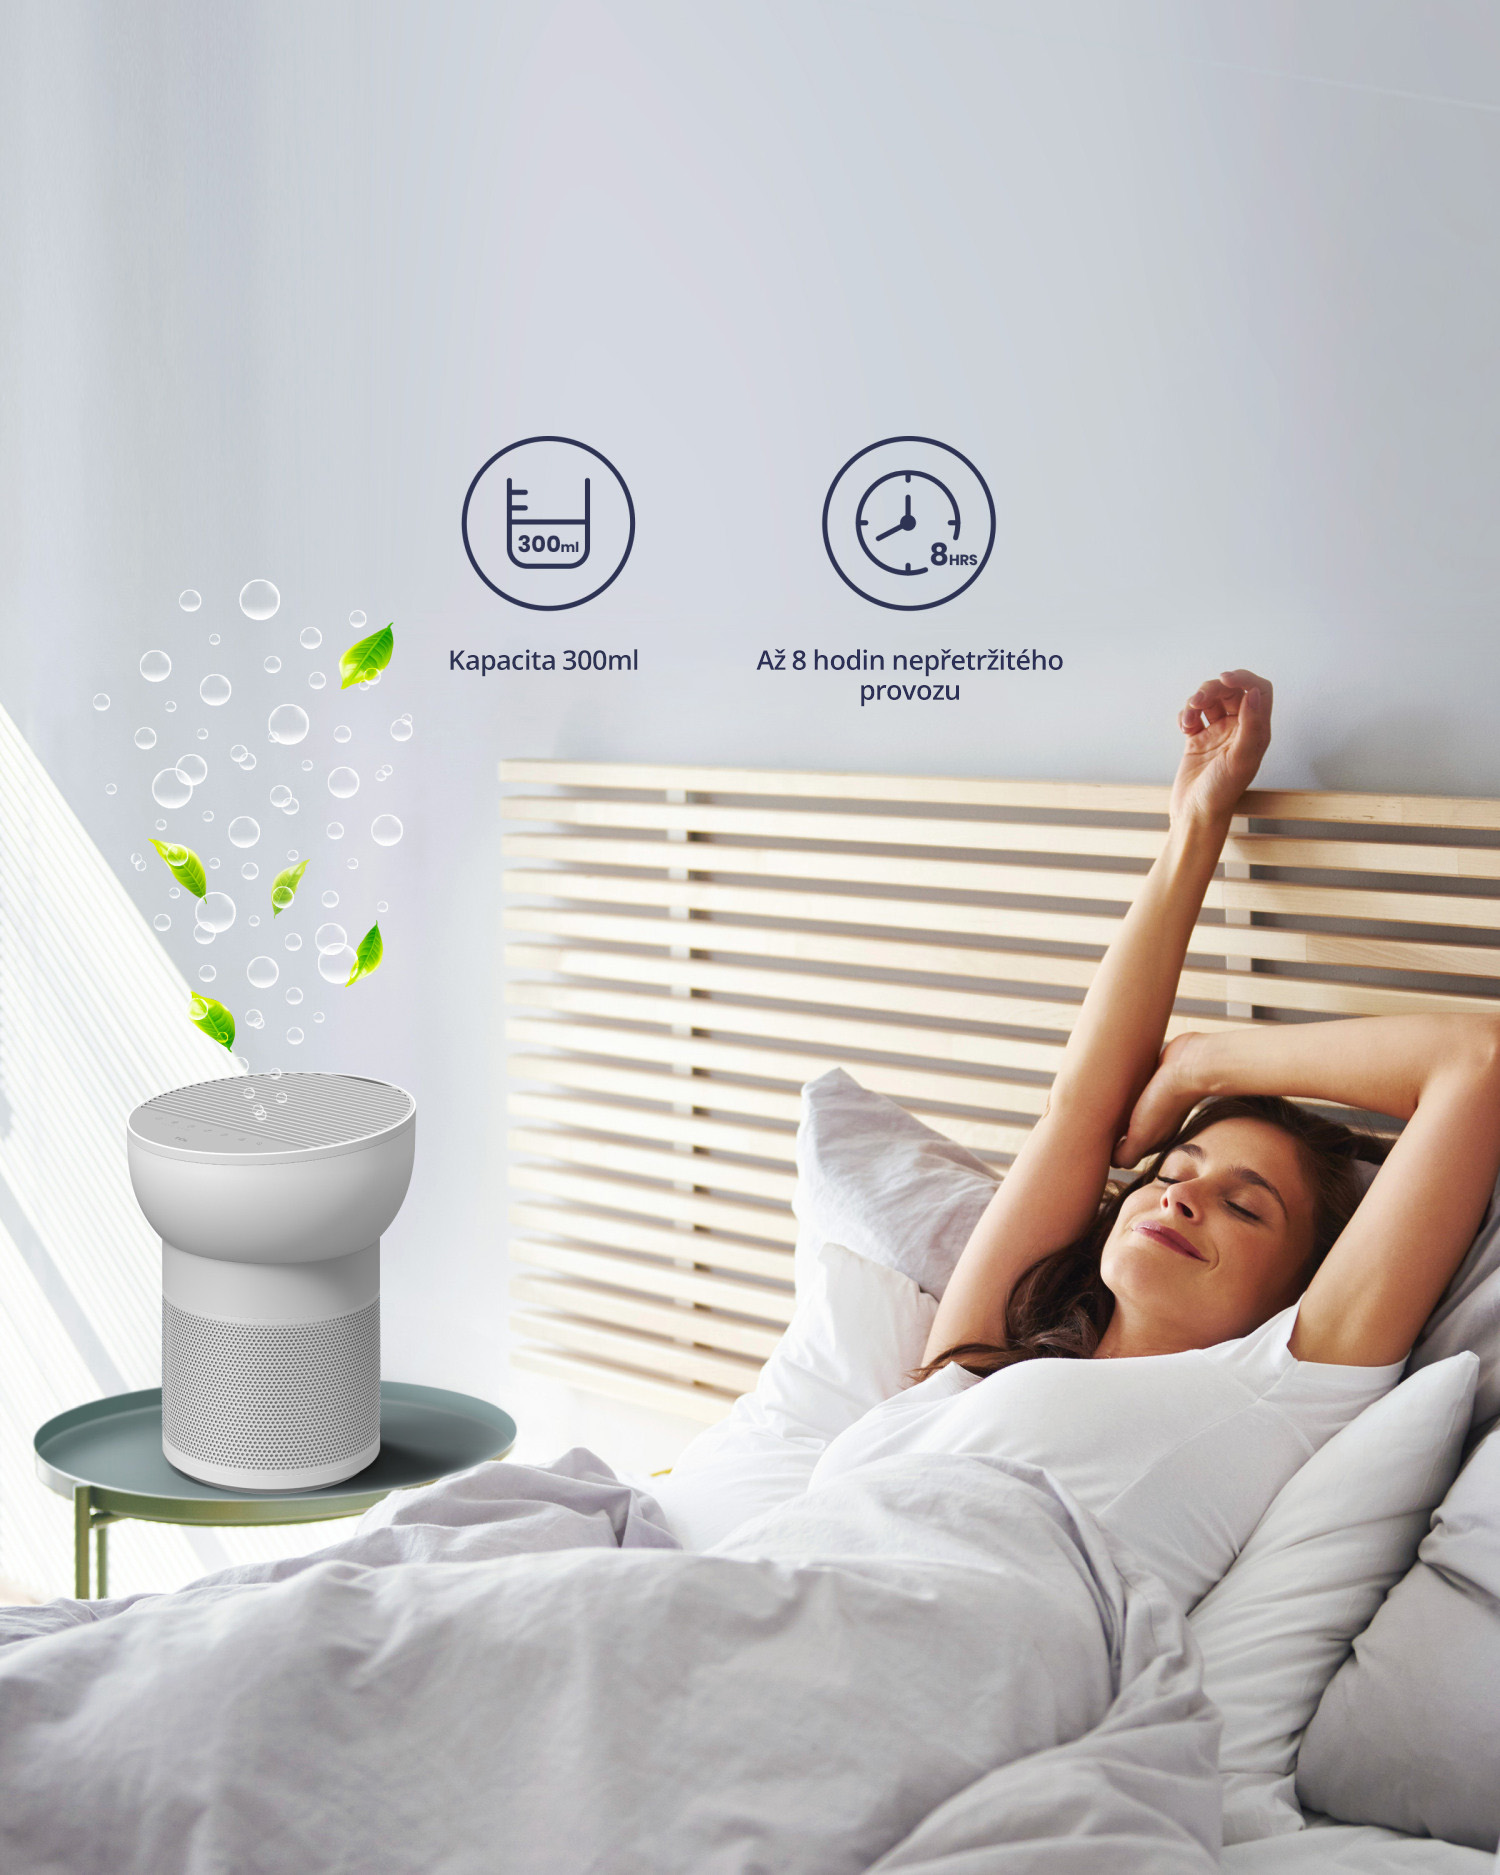 2-in-1: Air Purification and Air Humidification